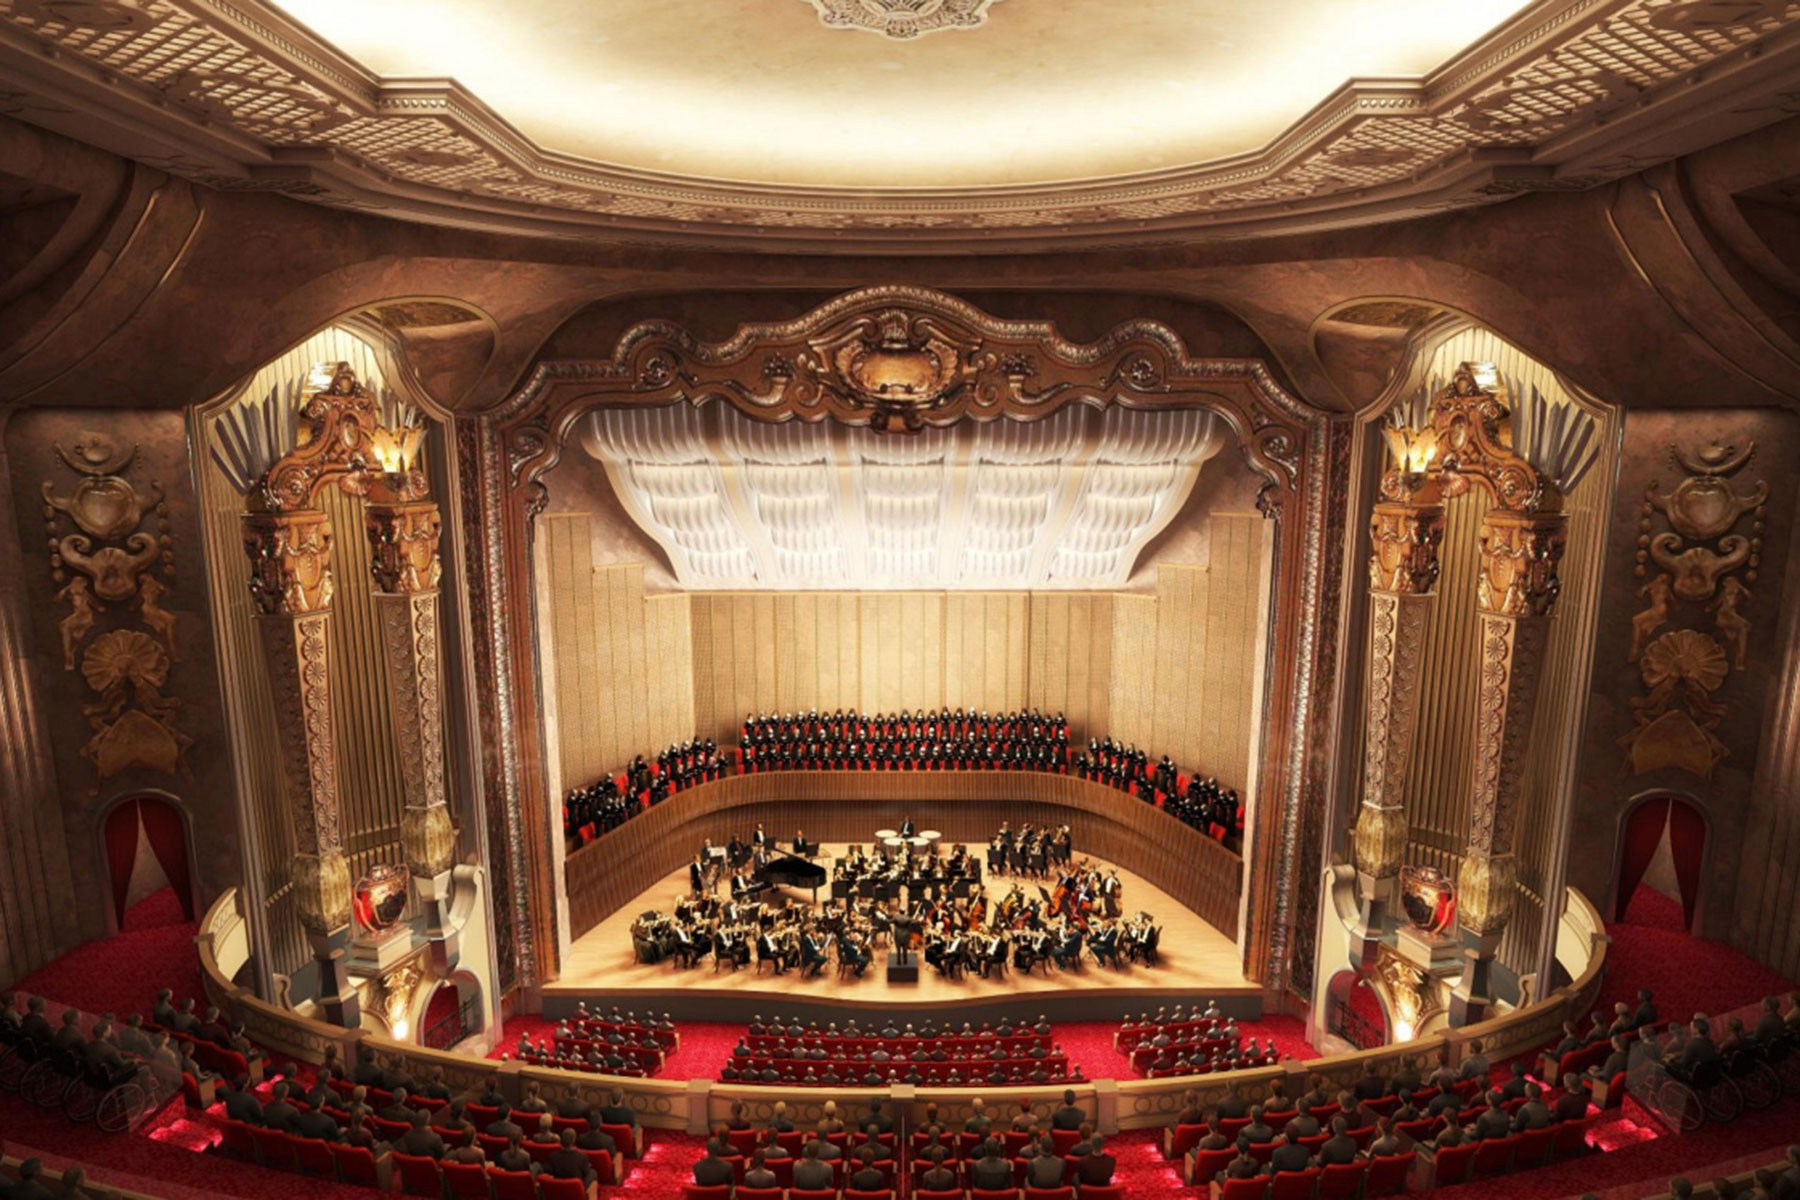 mso releases animated walkthrough envisioning warner theater space